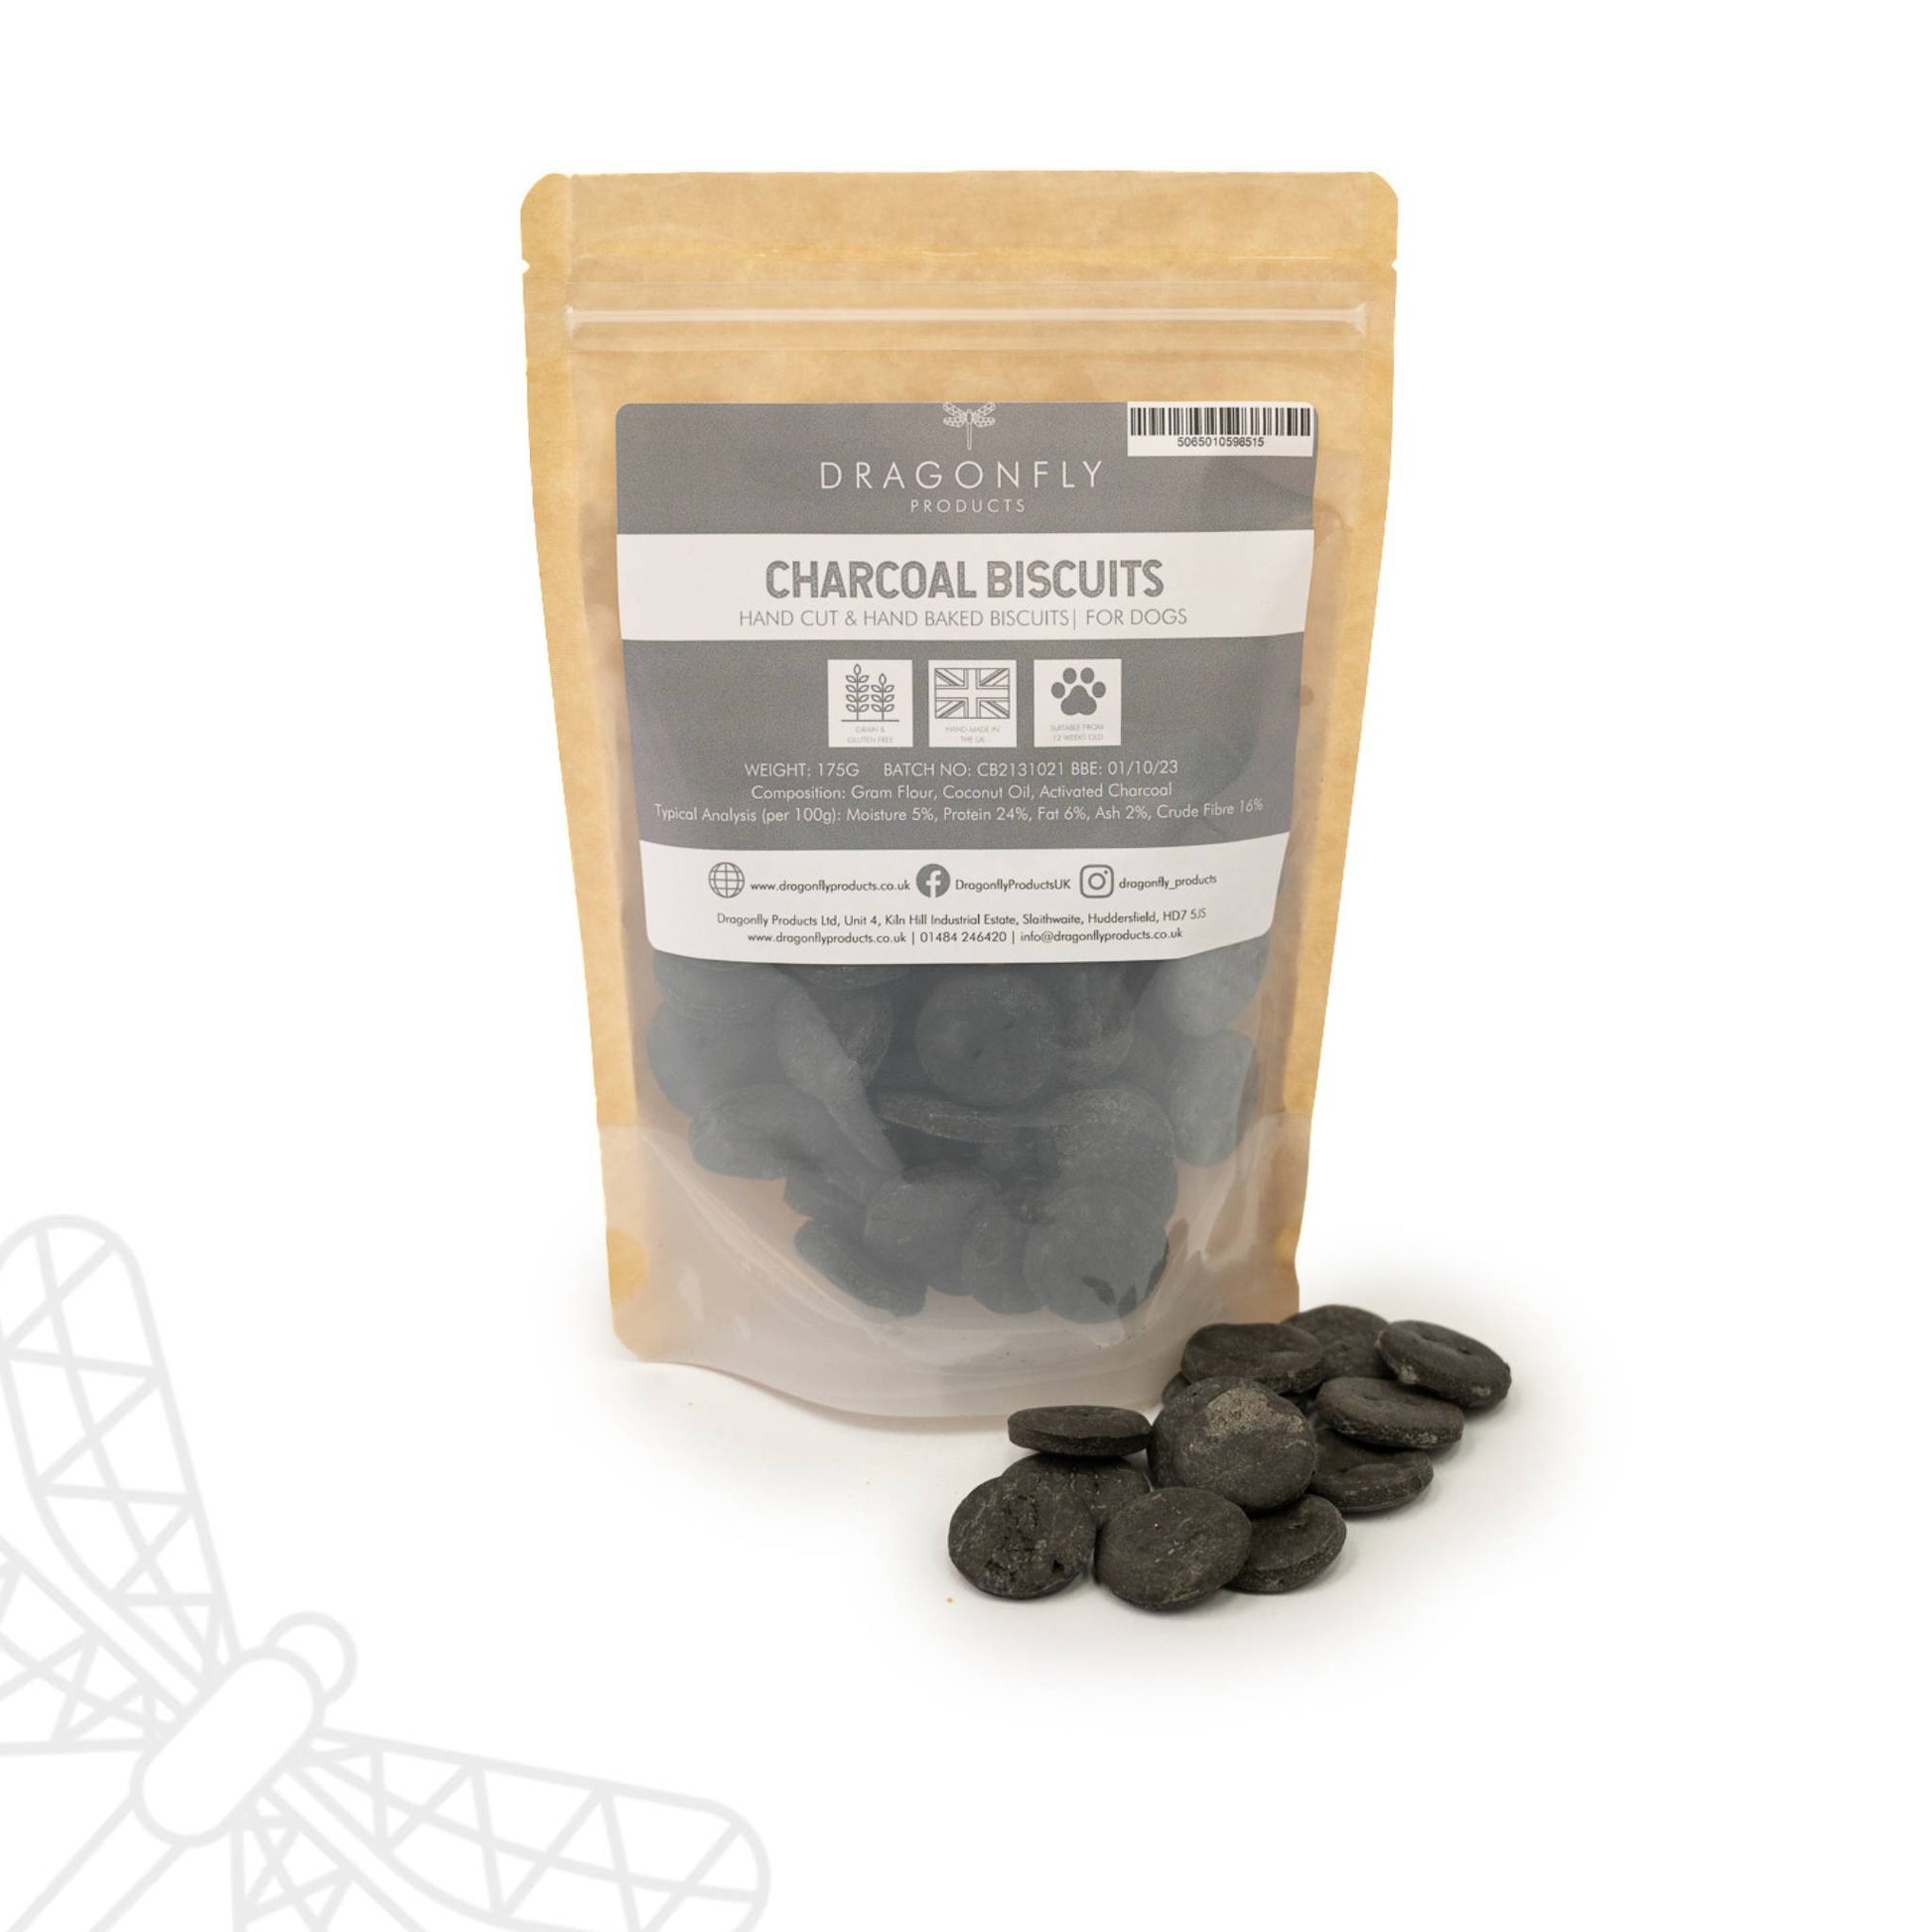 Charcoal biscuits for dogs